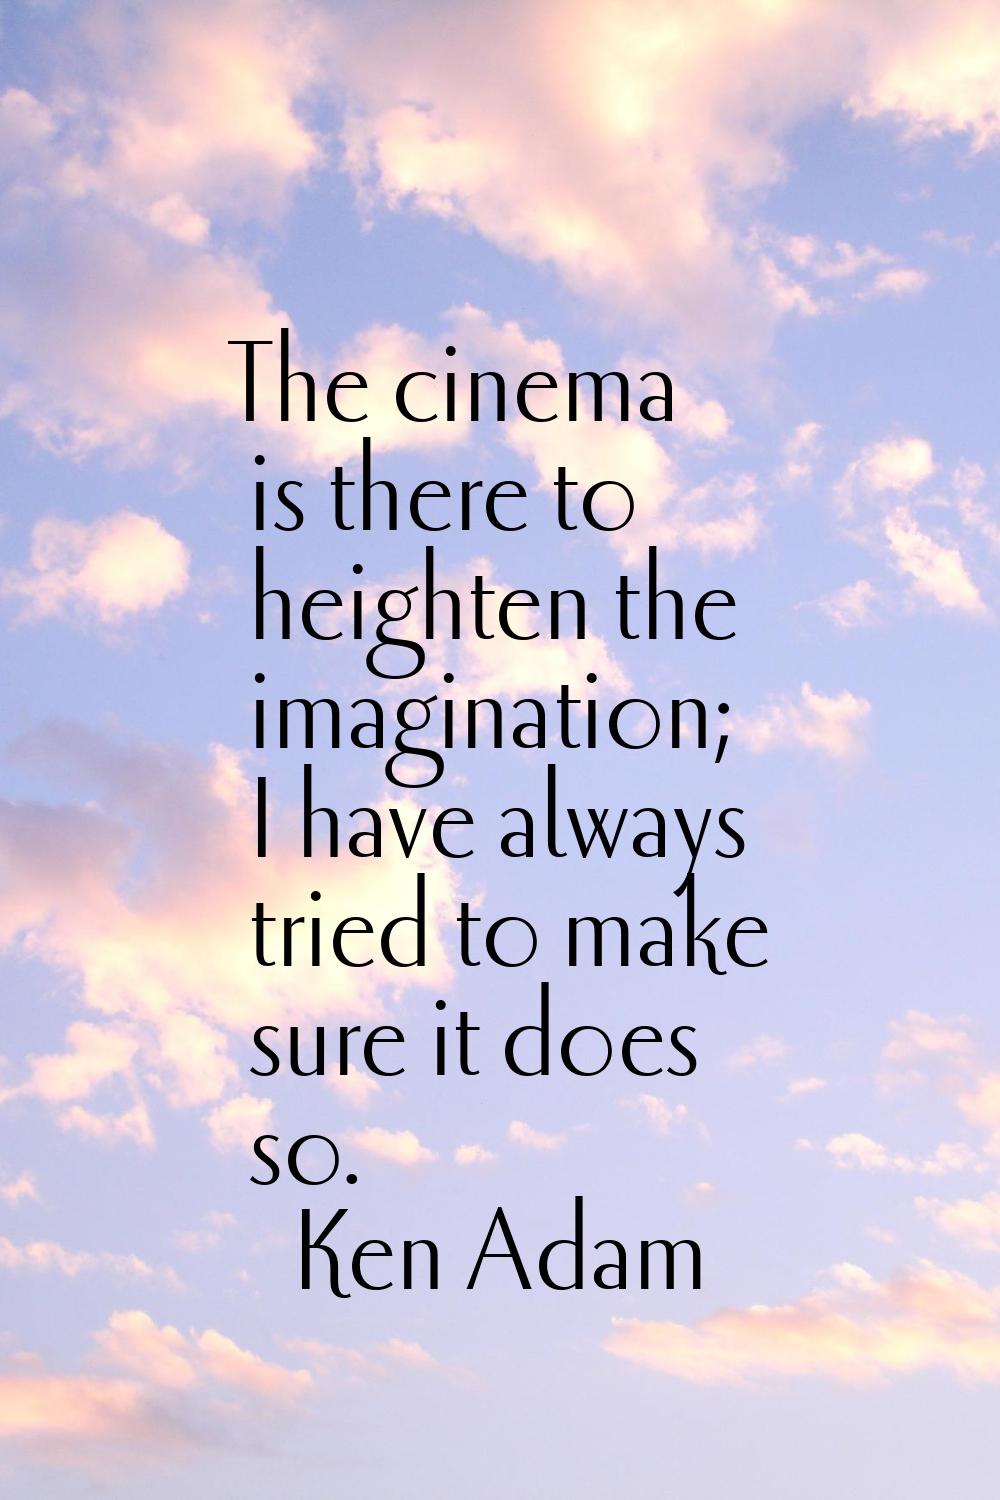 The cinema is there to heighten the imagination; I have always tried to make sure it does so.